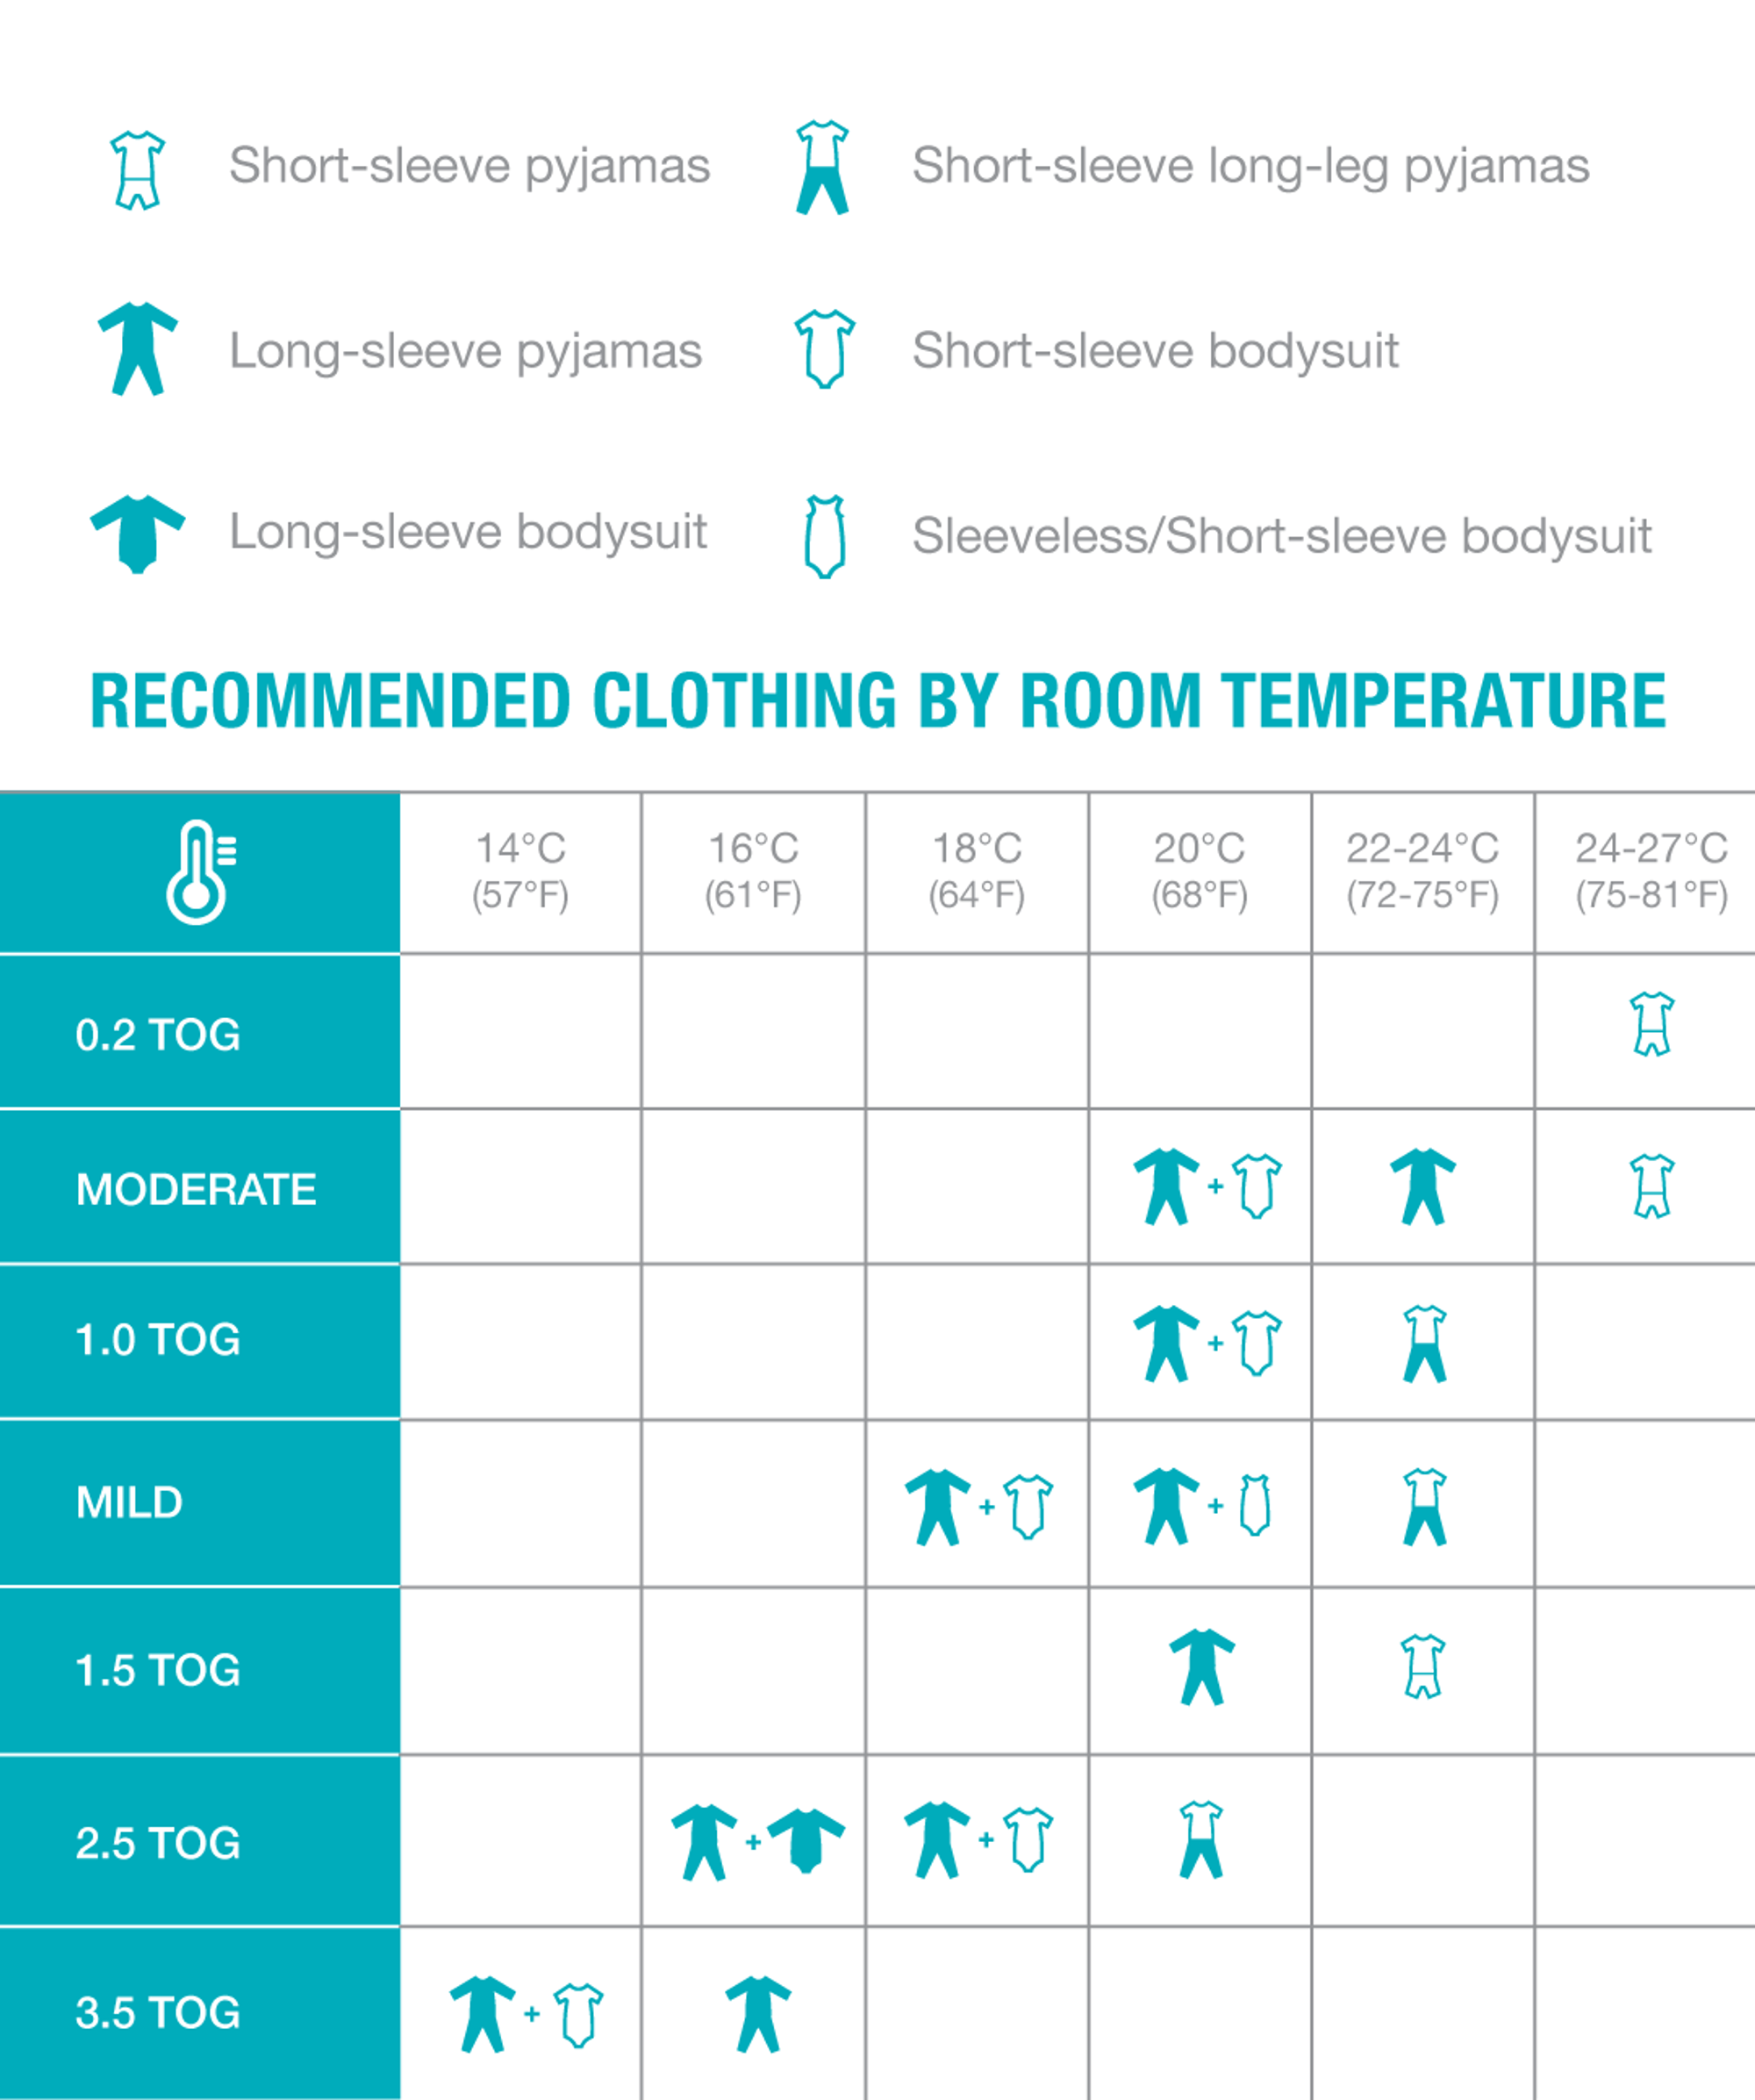 Recommended clothing by temperature